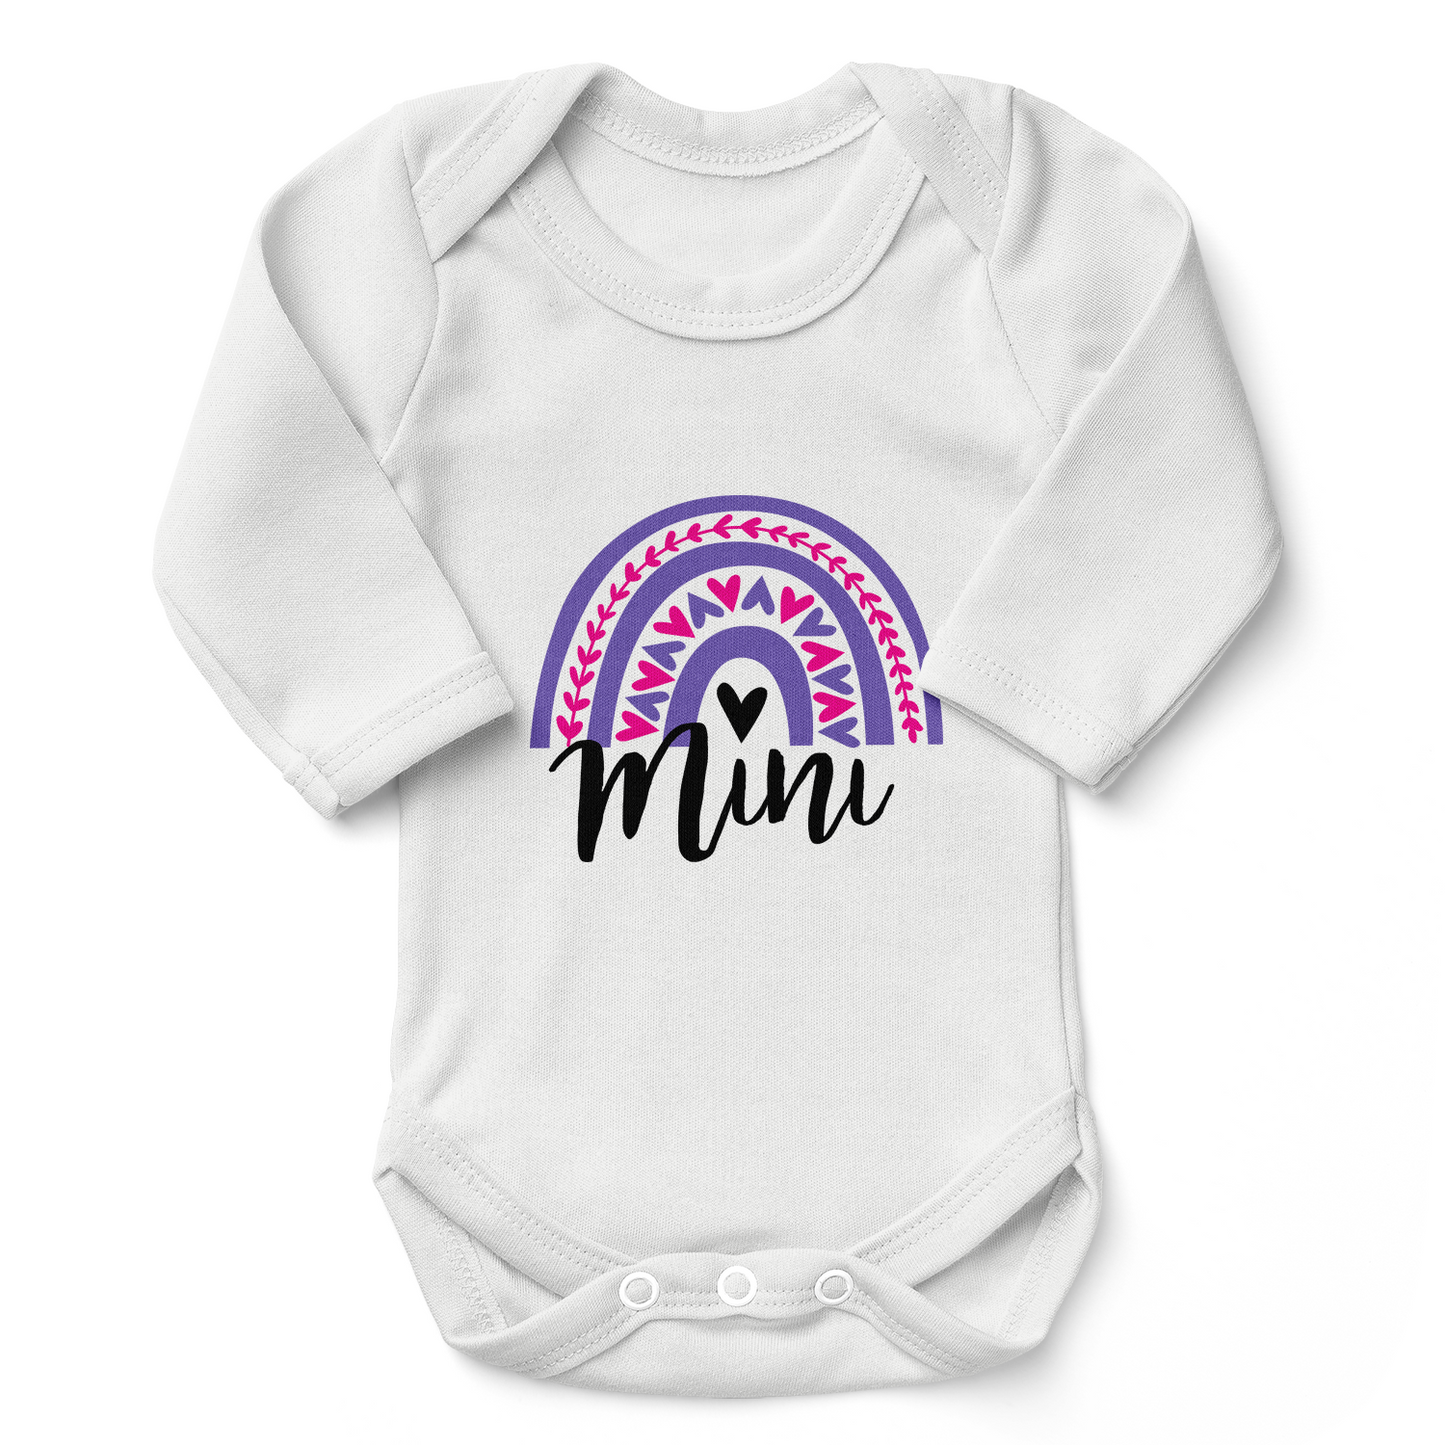 Endanzoo Matching Mom & Baby Organic Outfits - Rainbow Love for Mommy & Baby